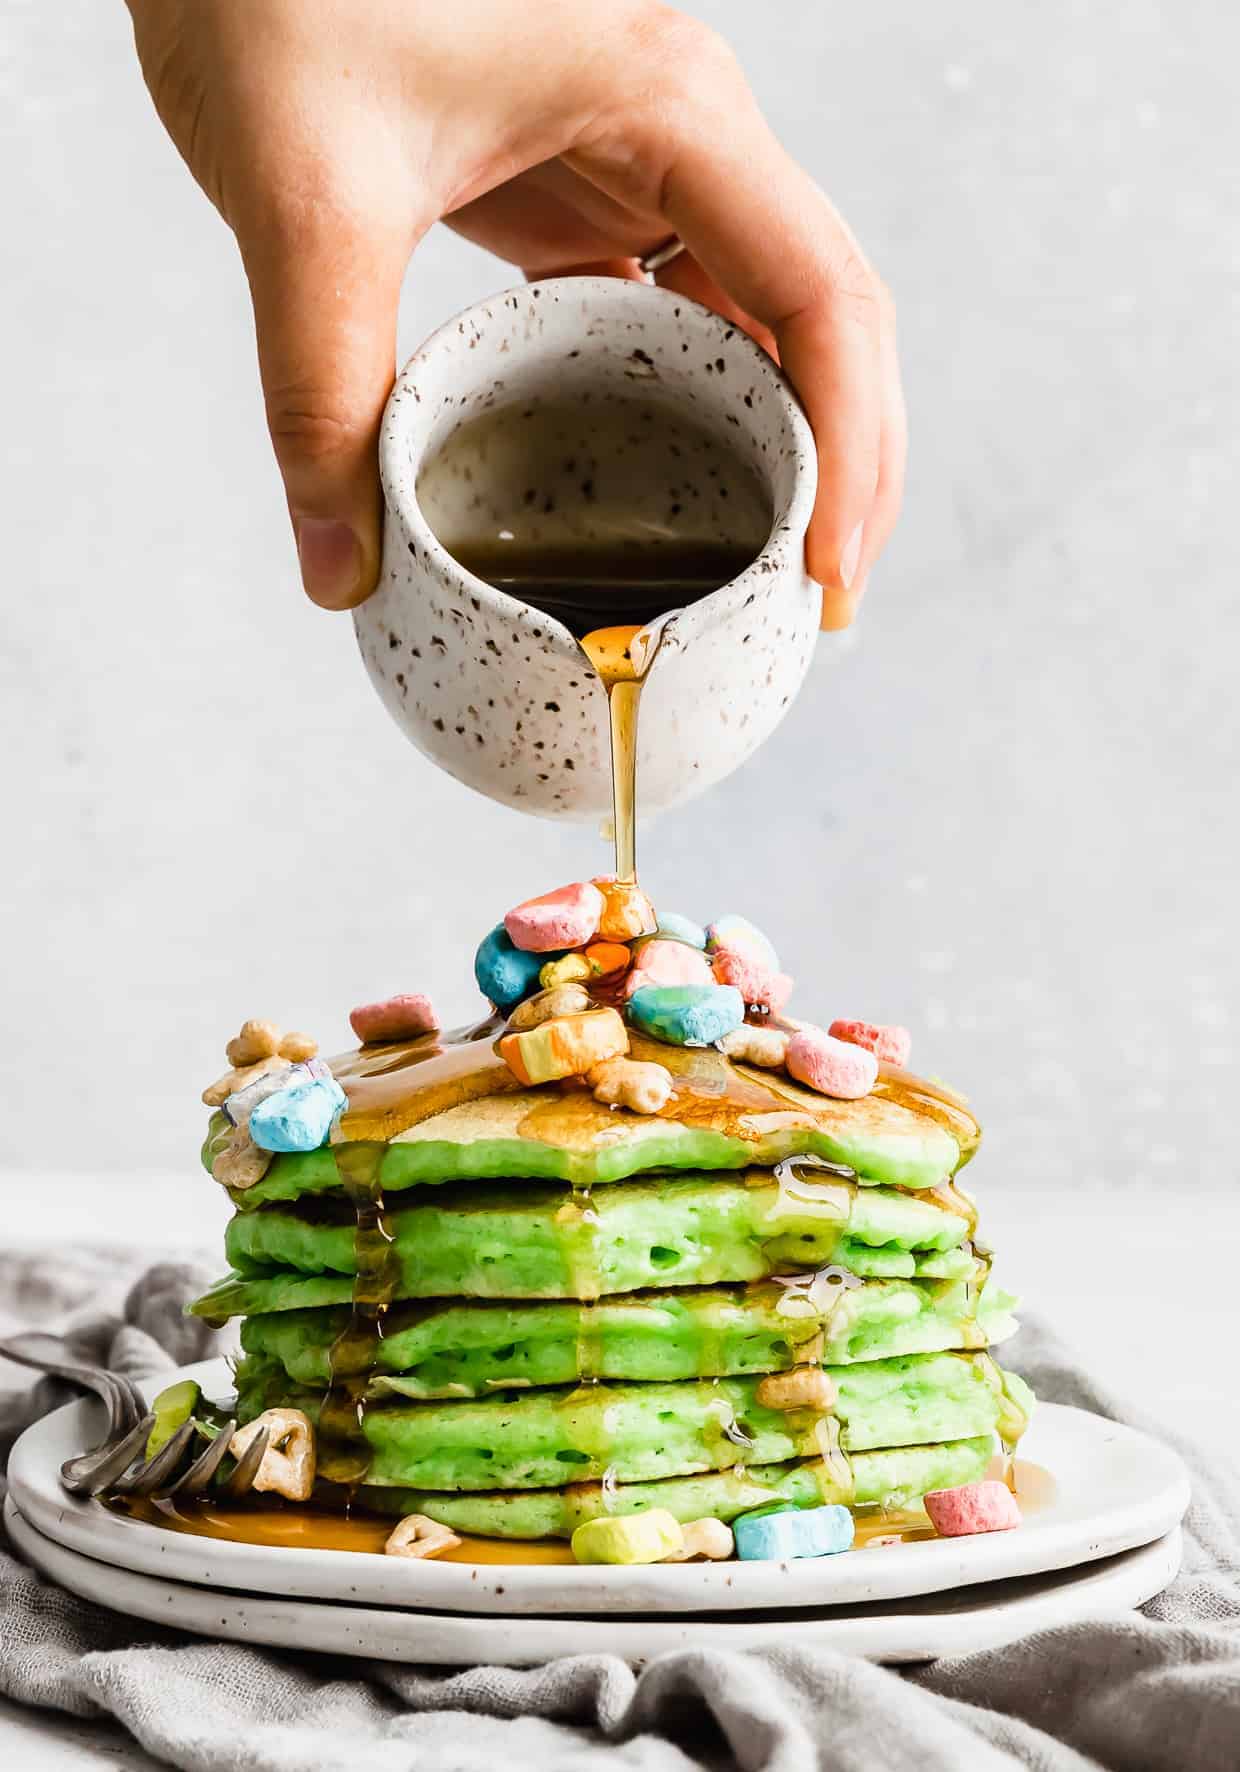 Hand pouring syrup over green pancake stack with lucky charms marshmallows over top.